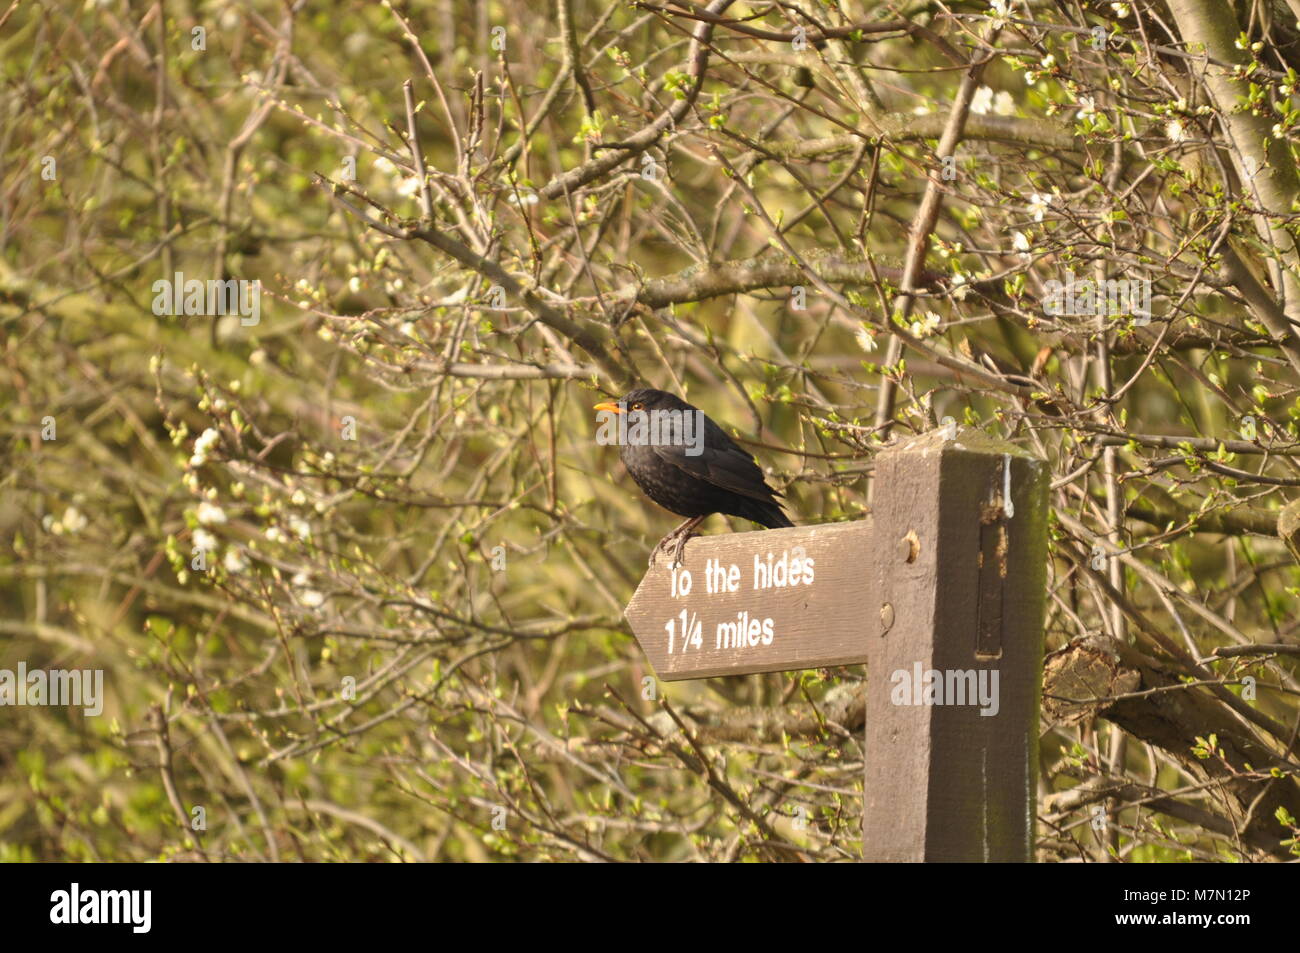 Common Blackbird (Turdus merula) conveniently perched on a to the hides sign. Elmley Nature Reserve, Kent. Stock Photo